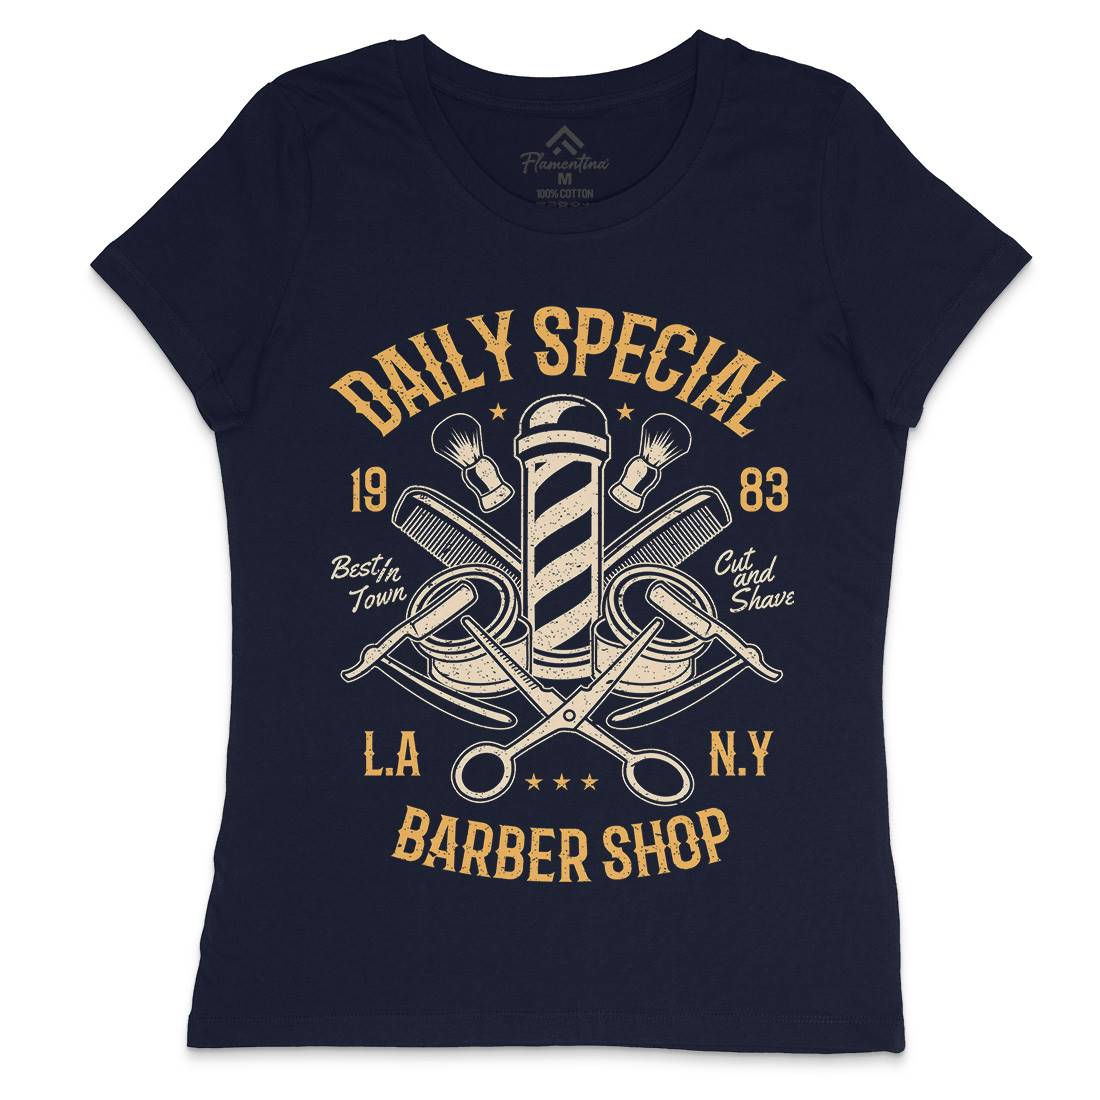 Daily Special Shop Womens Crew Neck T-Shirt Barber A041